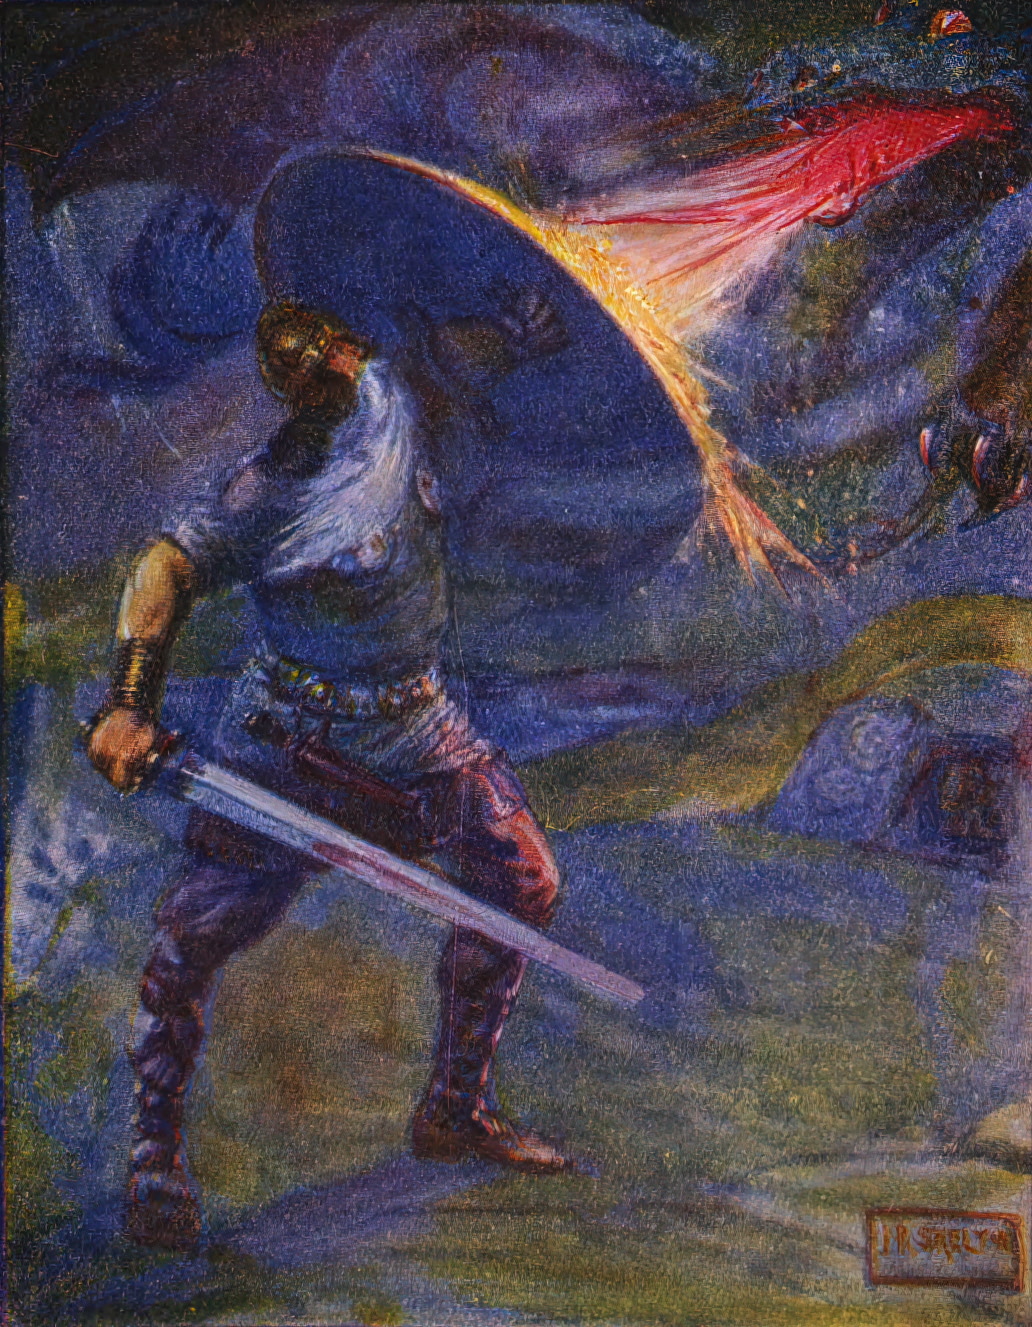 Beowulf raising his shield to protect himself from the dragon's fiery breath.